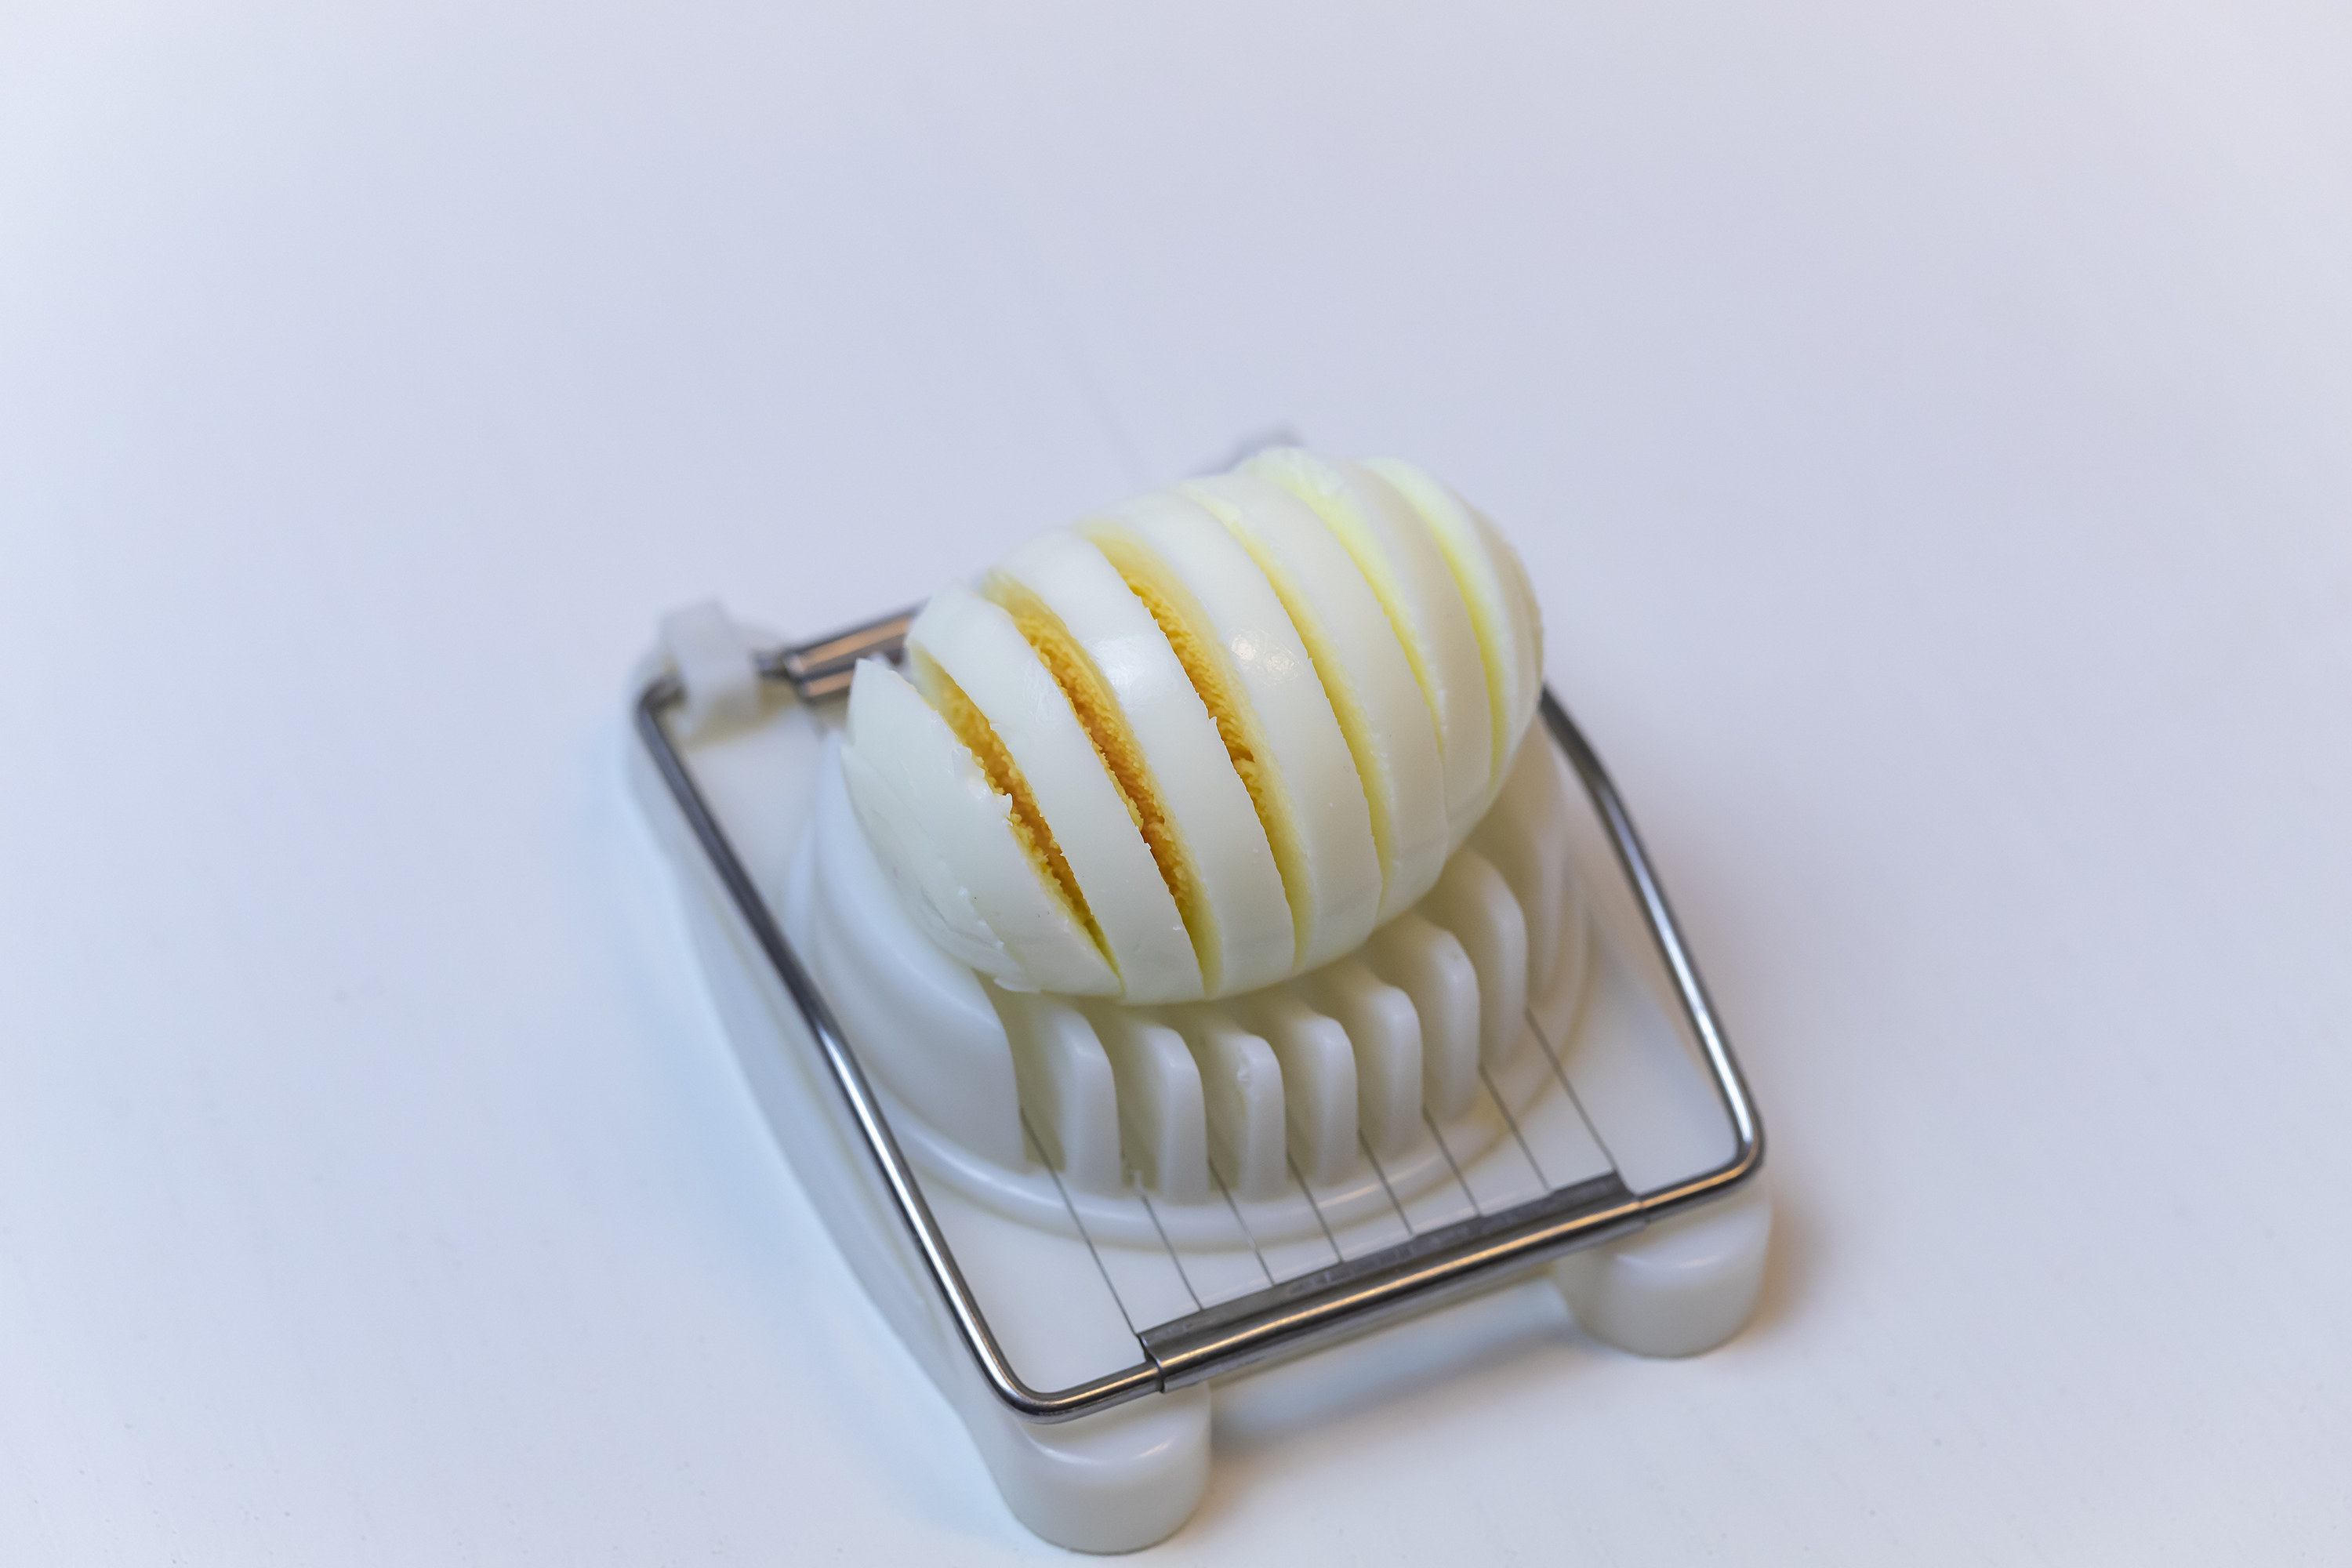 Egg sliced into even pieces using a plastic and metal egg slicer tool